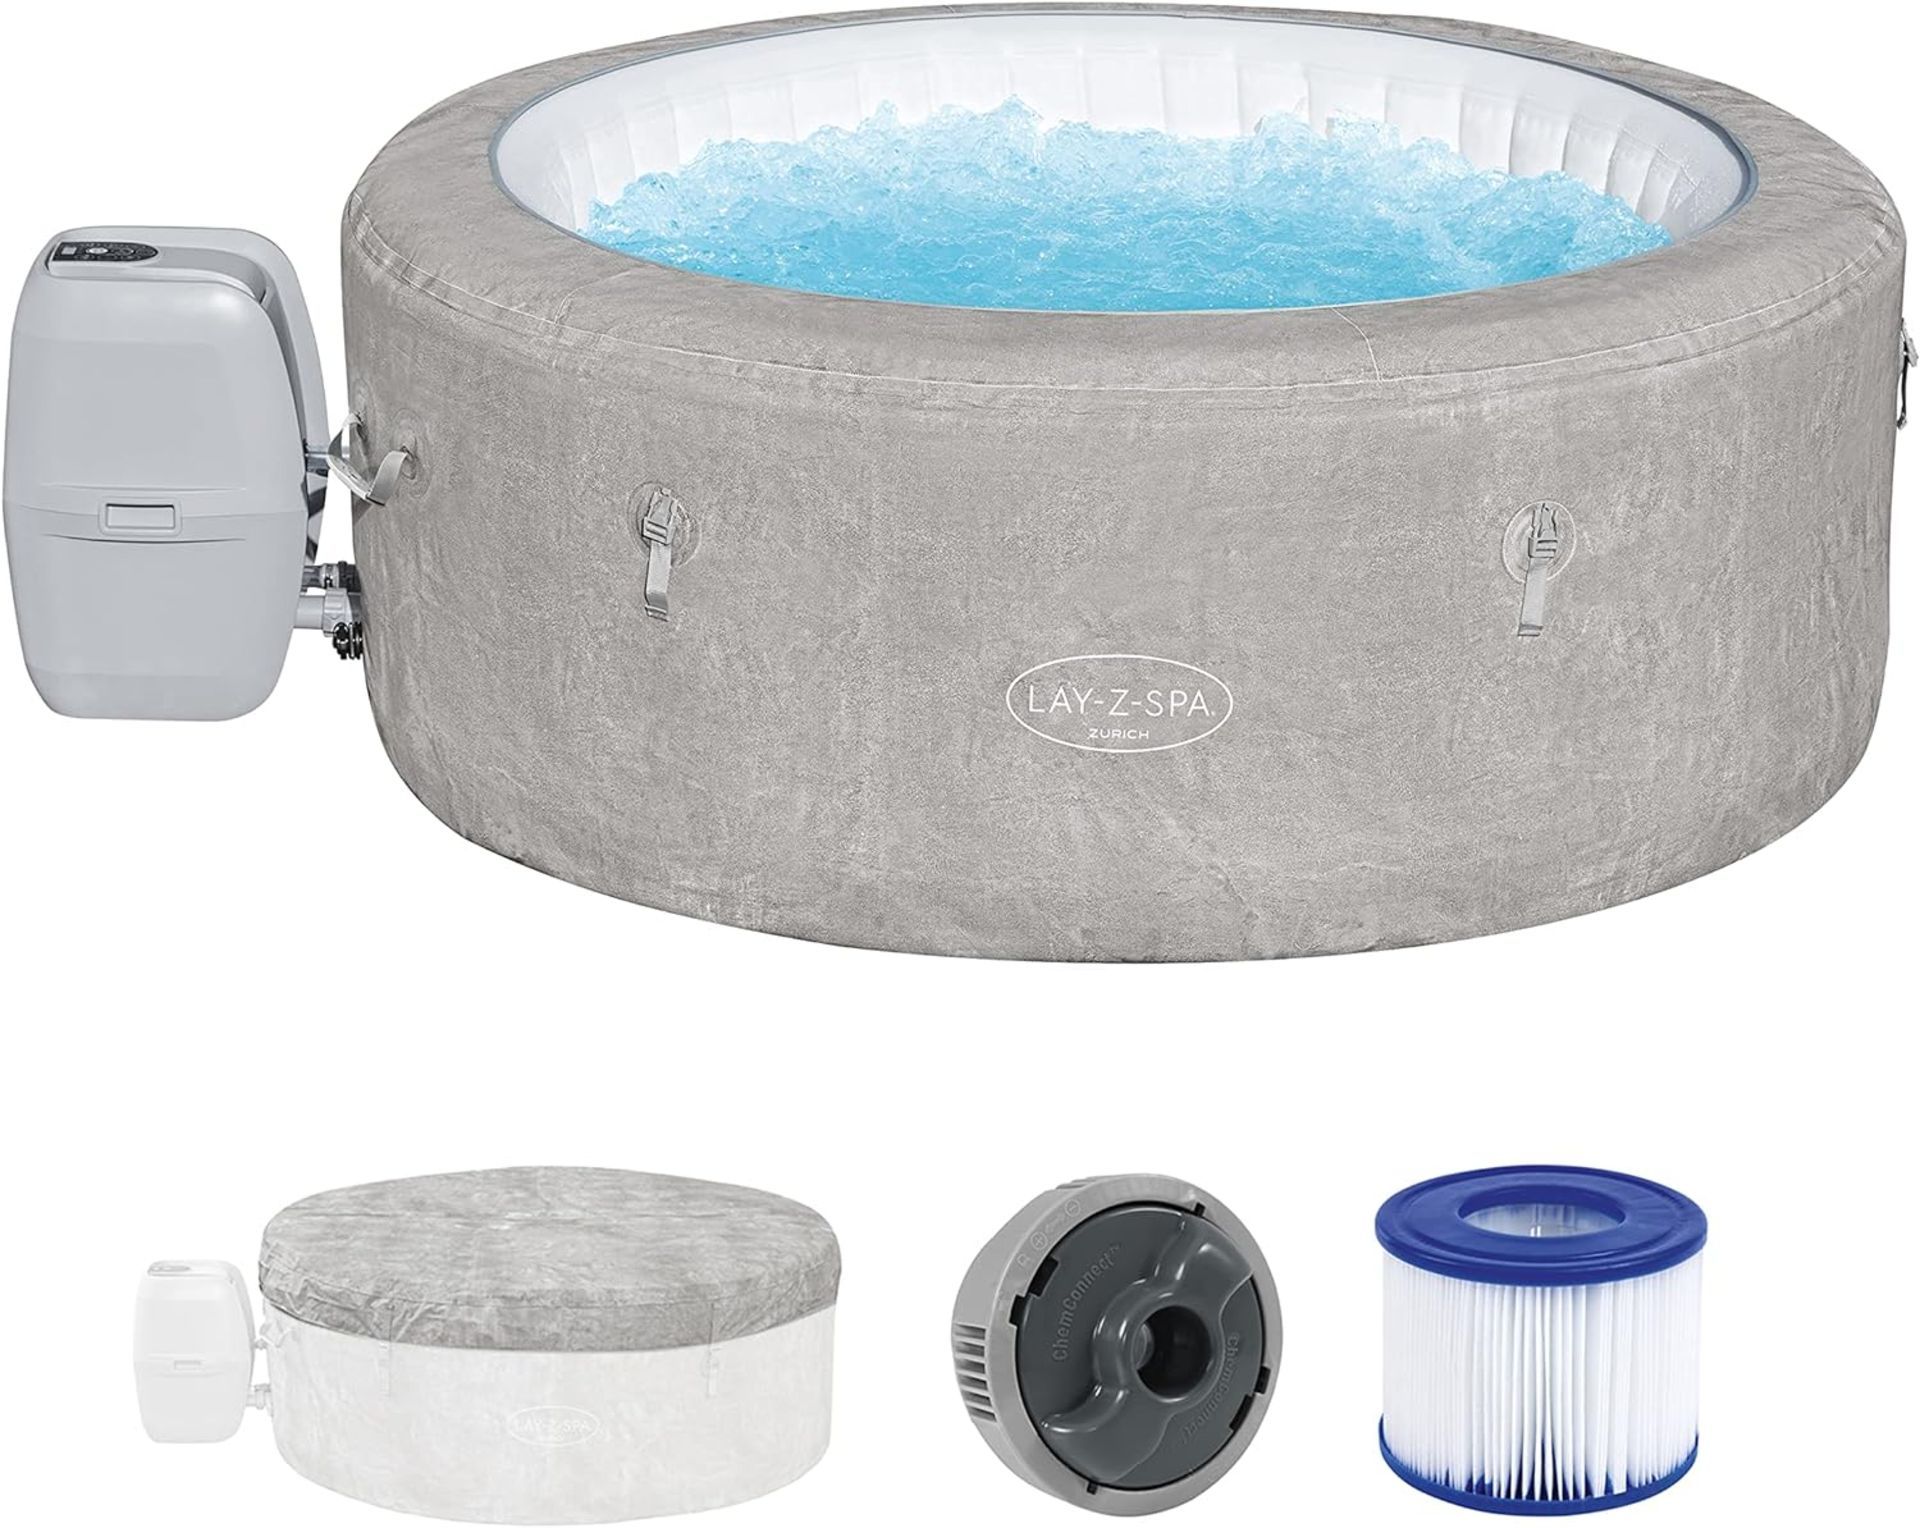 RRP £729.99 - Lay-Z-Spa Zurich EnergySense Signature AirJetInflatable Hot Tub 2-4 person. - 180L x - Image 2 of 4